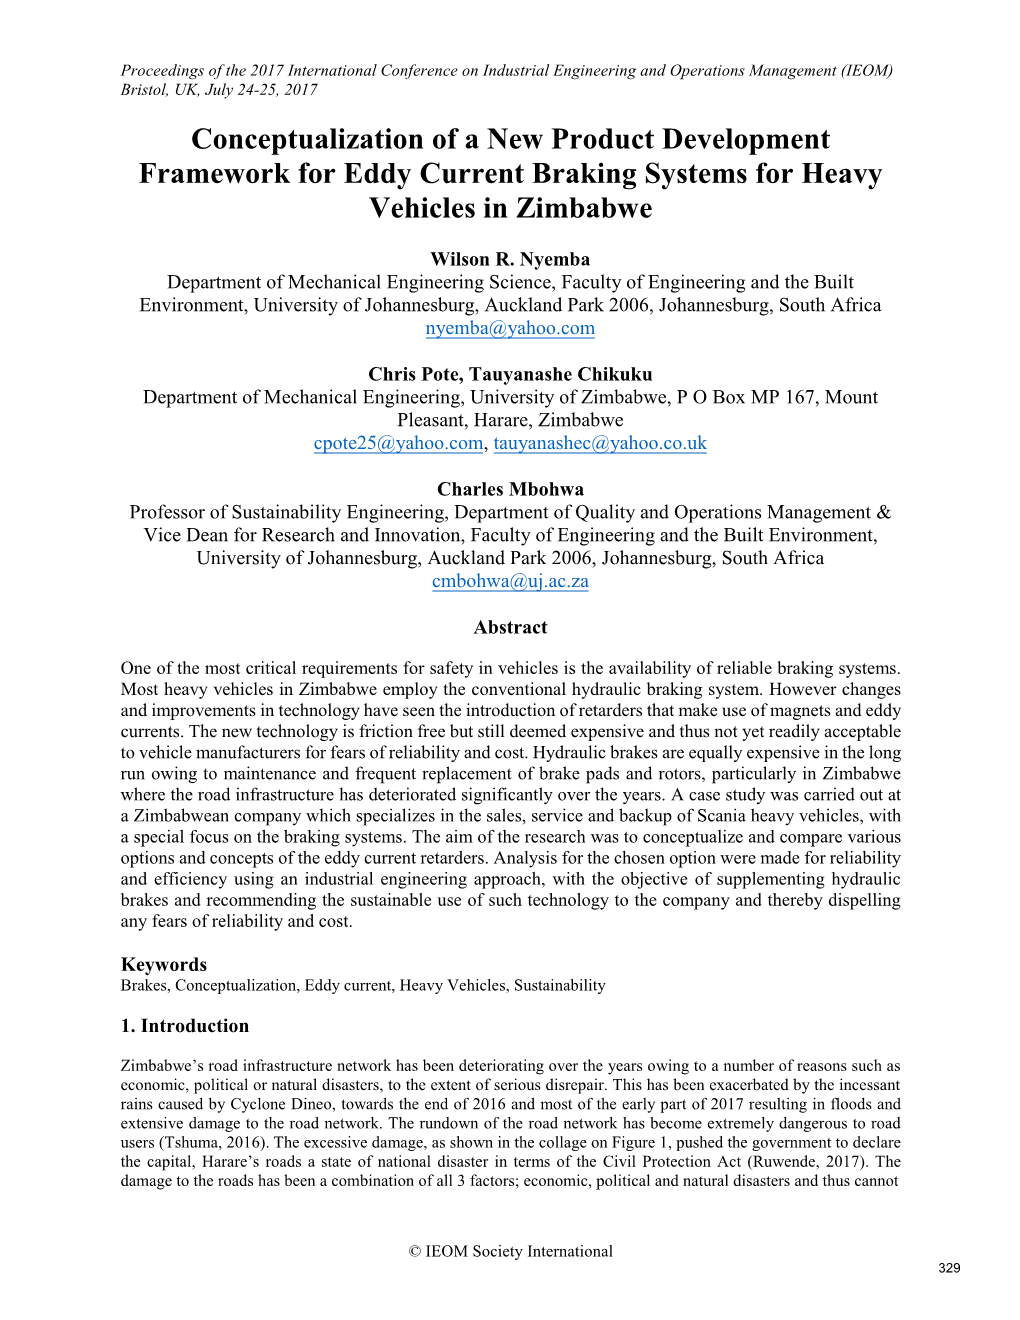 Conceptualization of a New Product Development Framework for Eddy Current Braking Systems for Heavy Vehicles in Zimbabwe